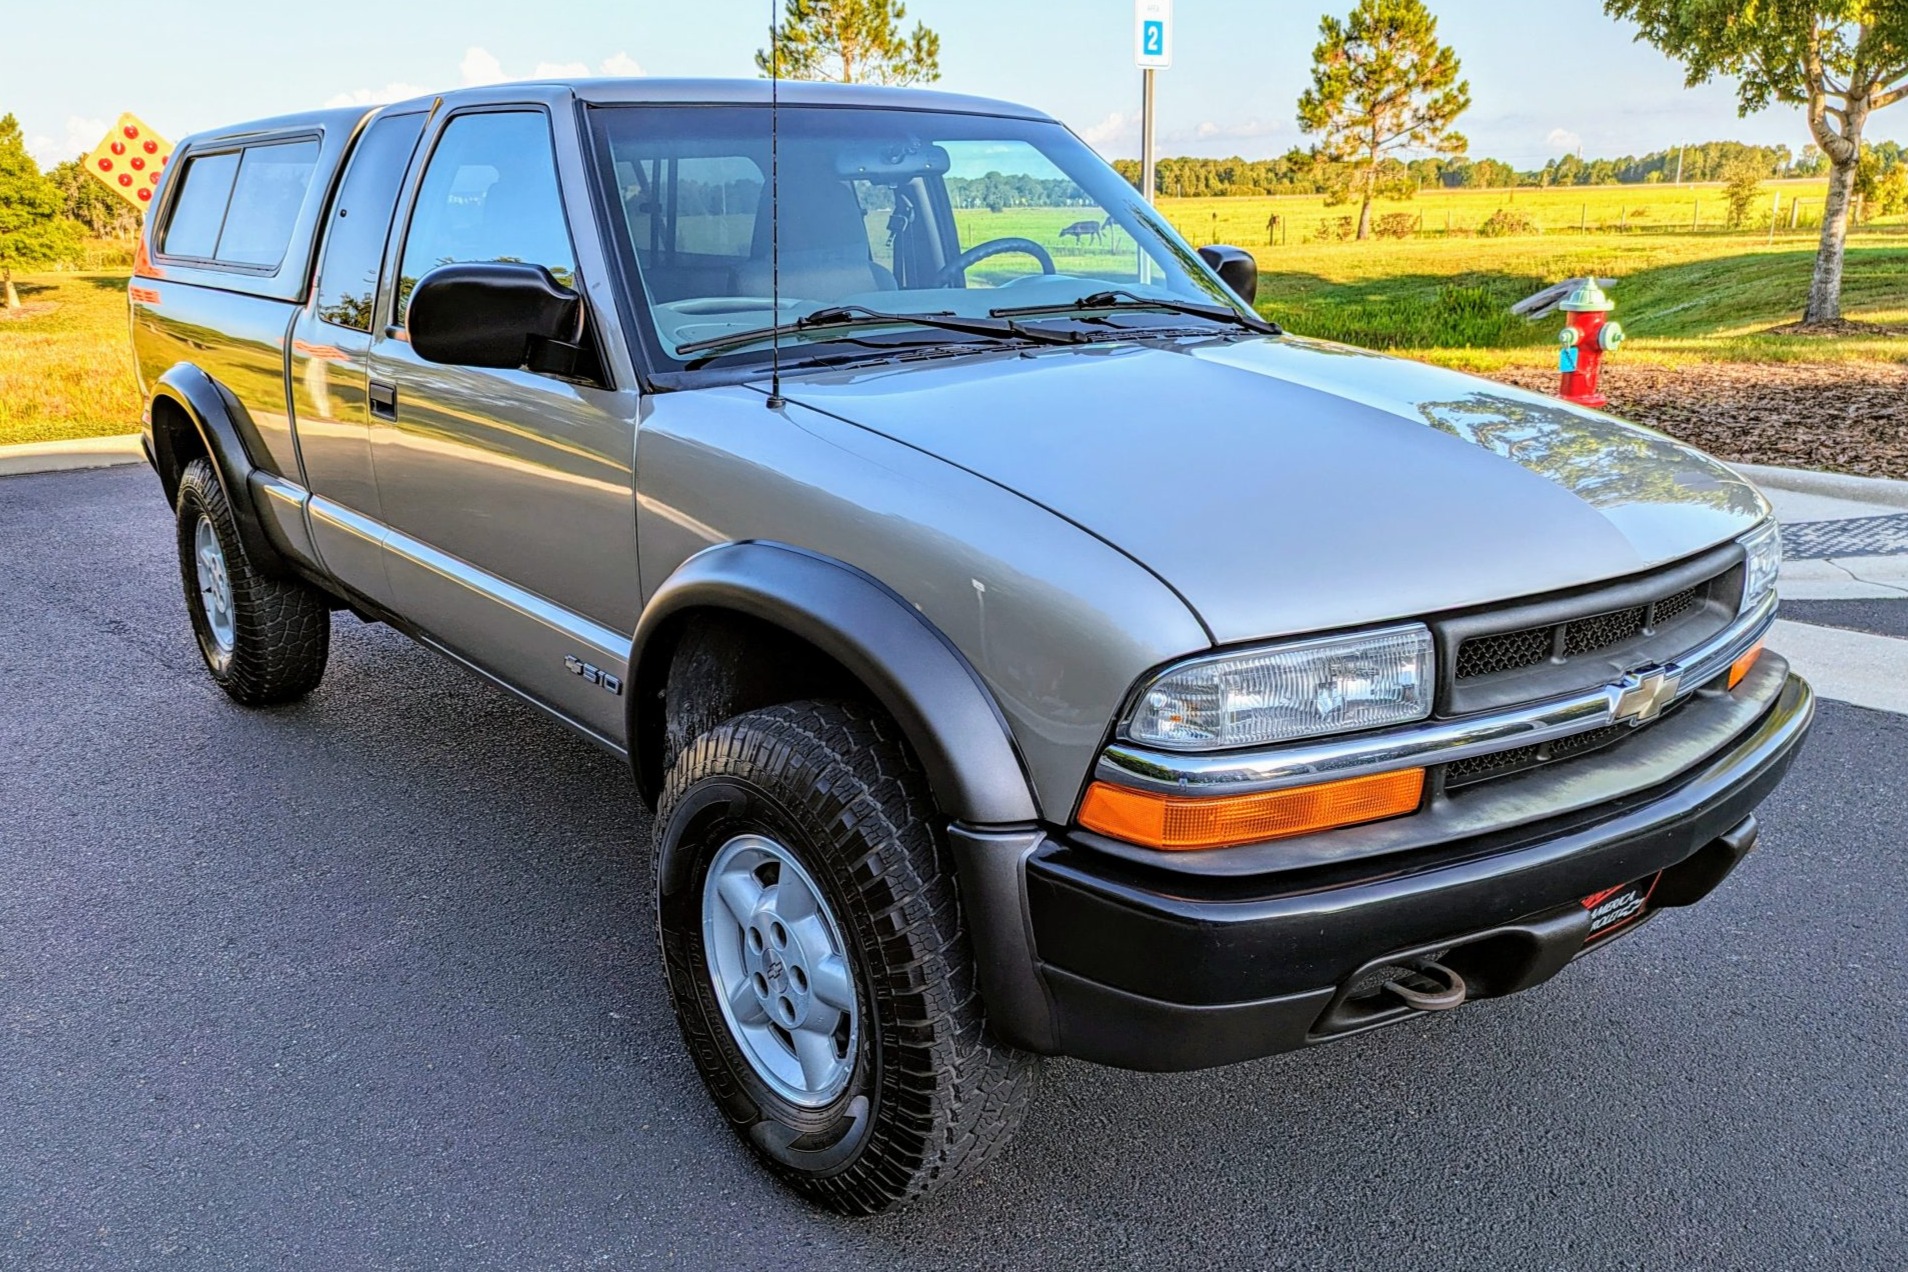 Used One-Owner 1999 Chevrolet S-10 LS ZR2 Extended Cab 4×4 5-Speed Review